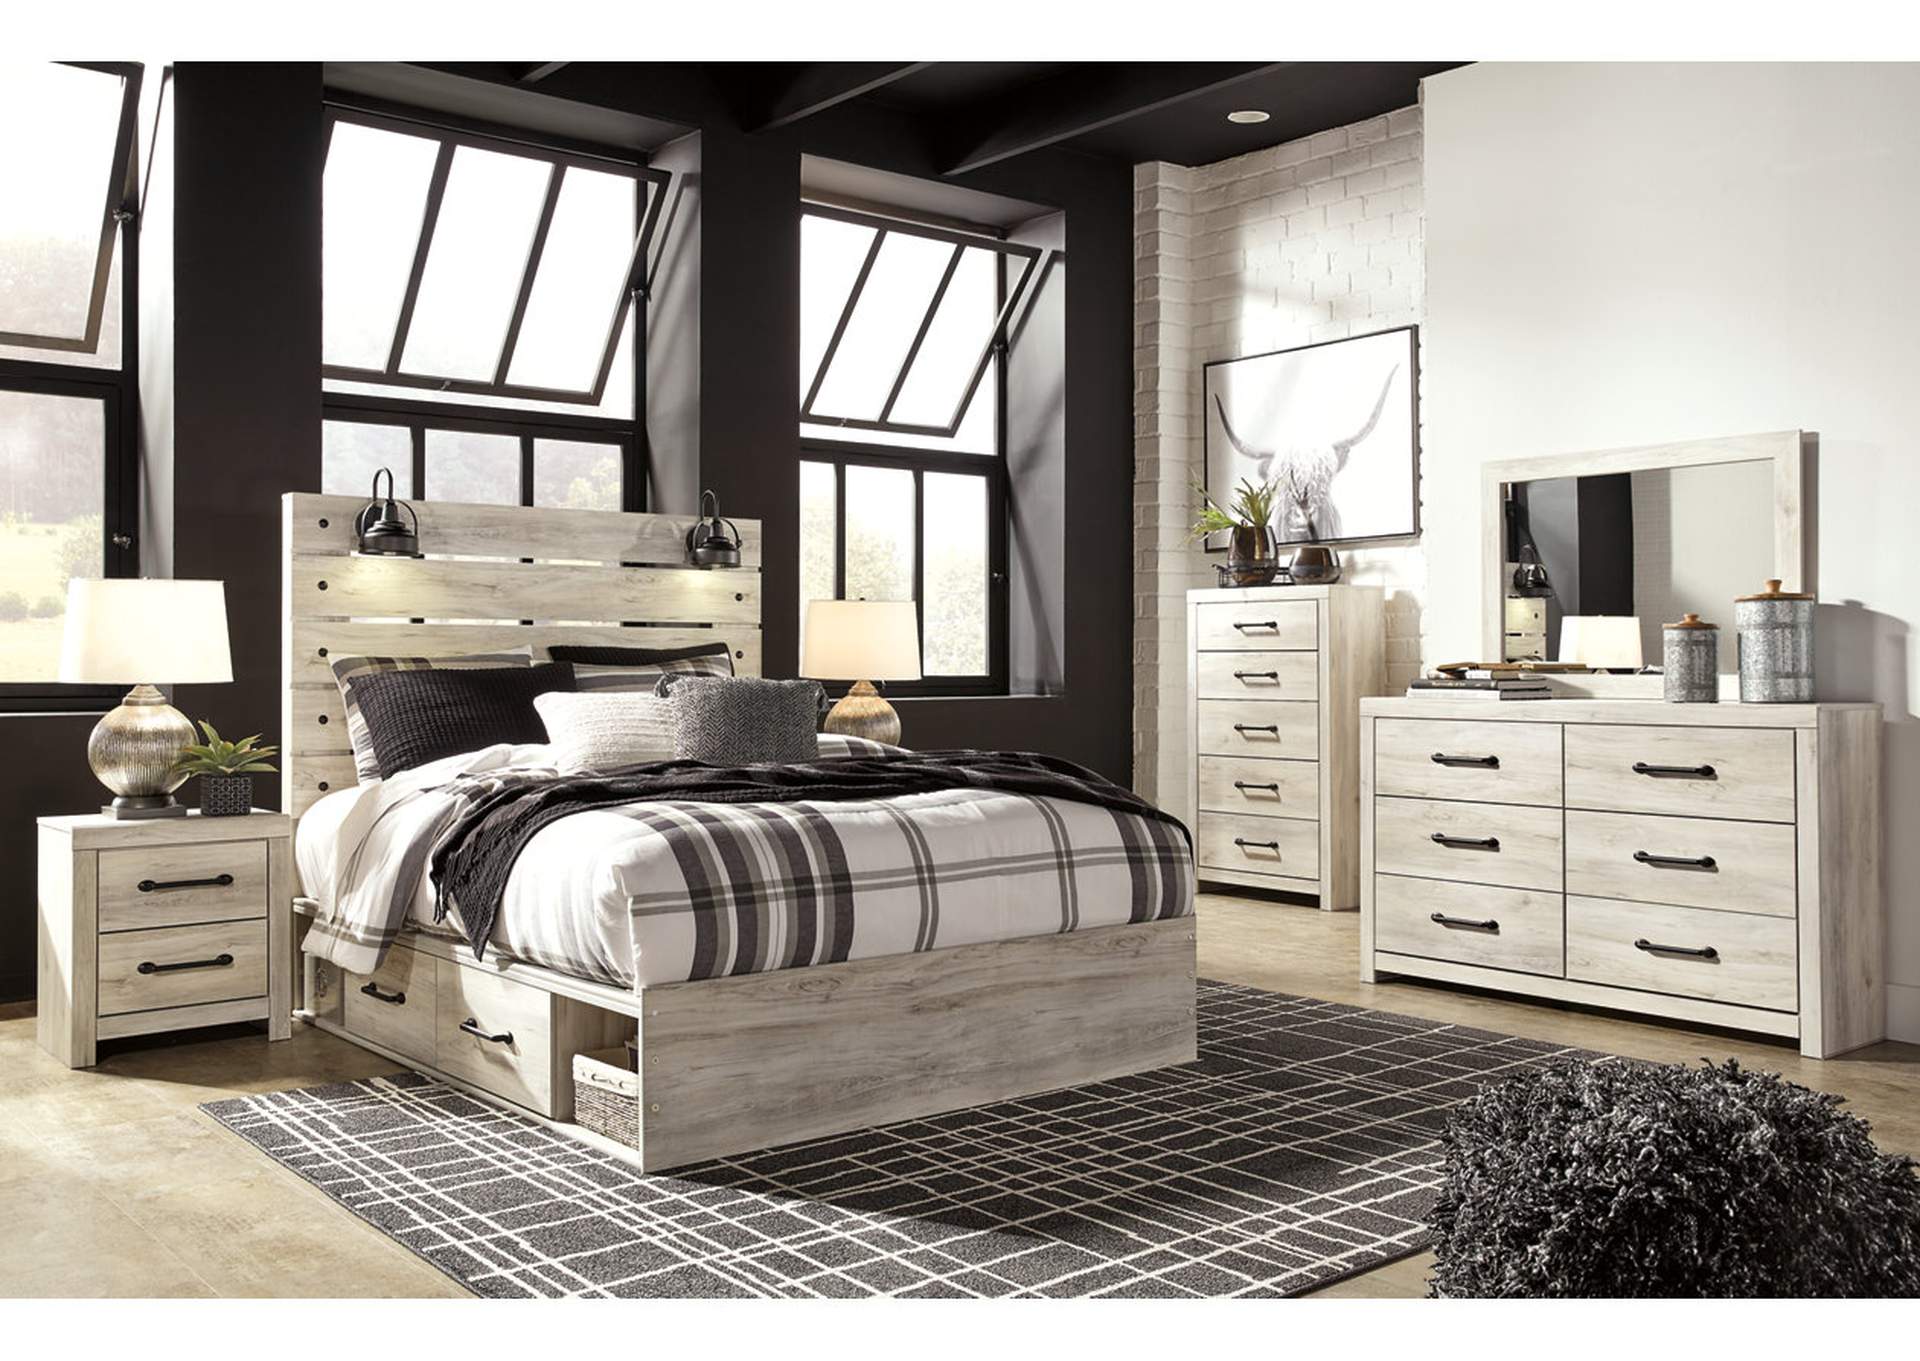 Cambeck Queen Panel Storage Bed, Dresser, Mirror, Chest and Nightstand,Signature Design By Ashley